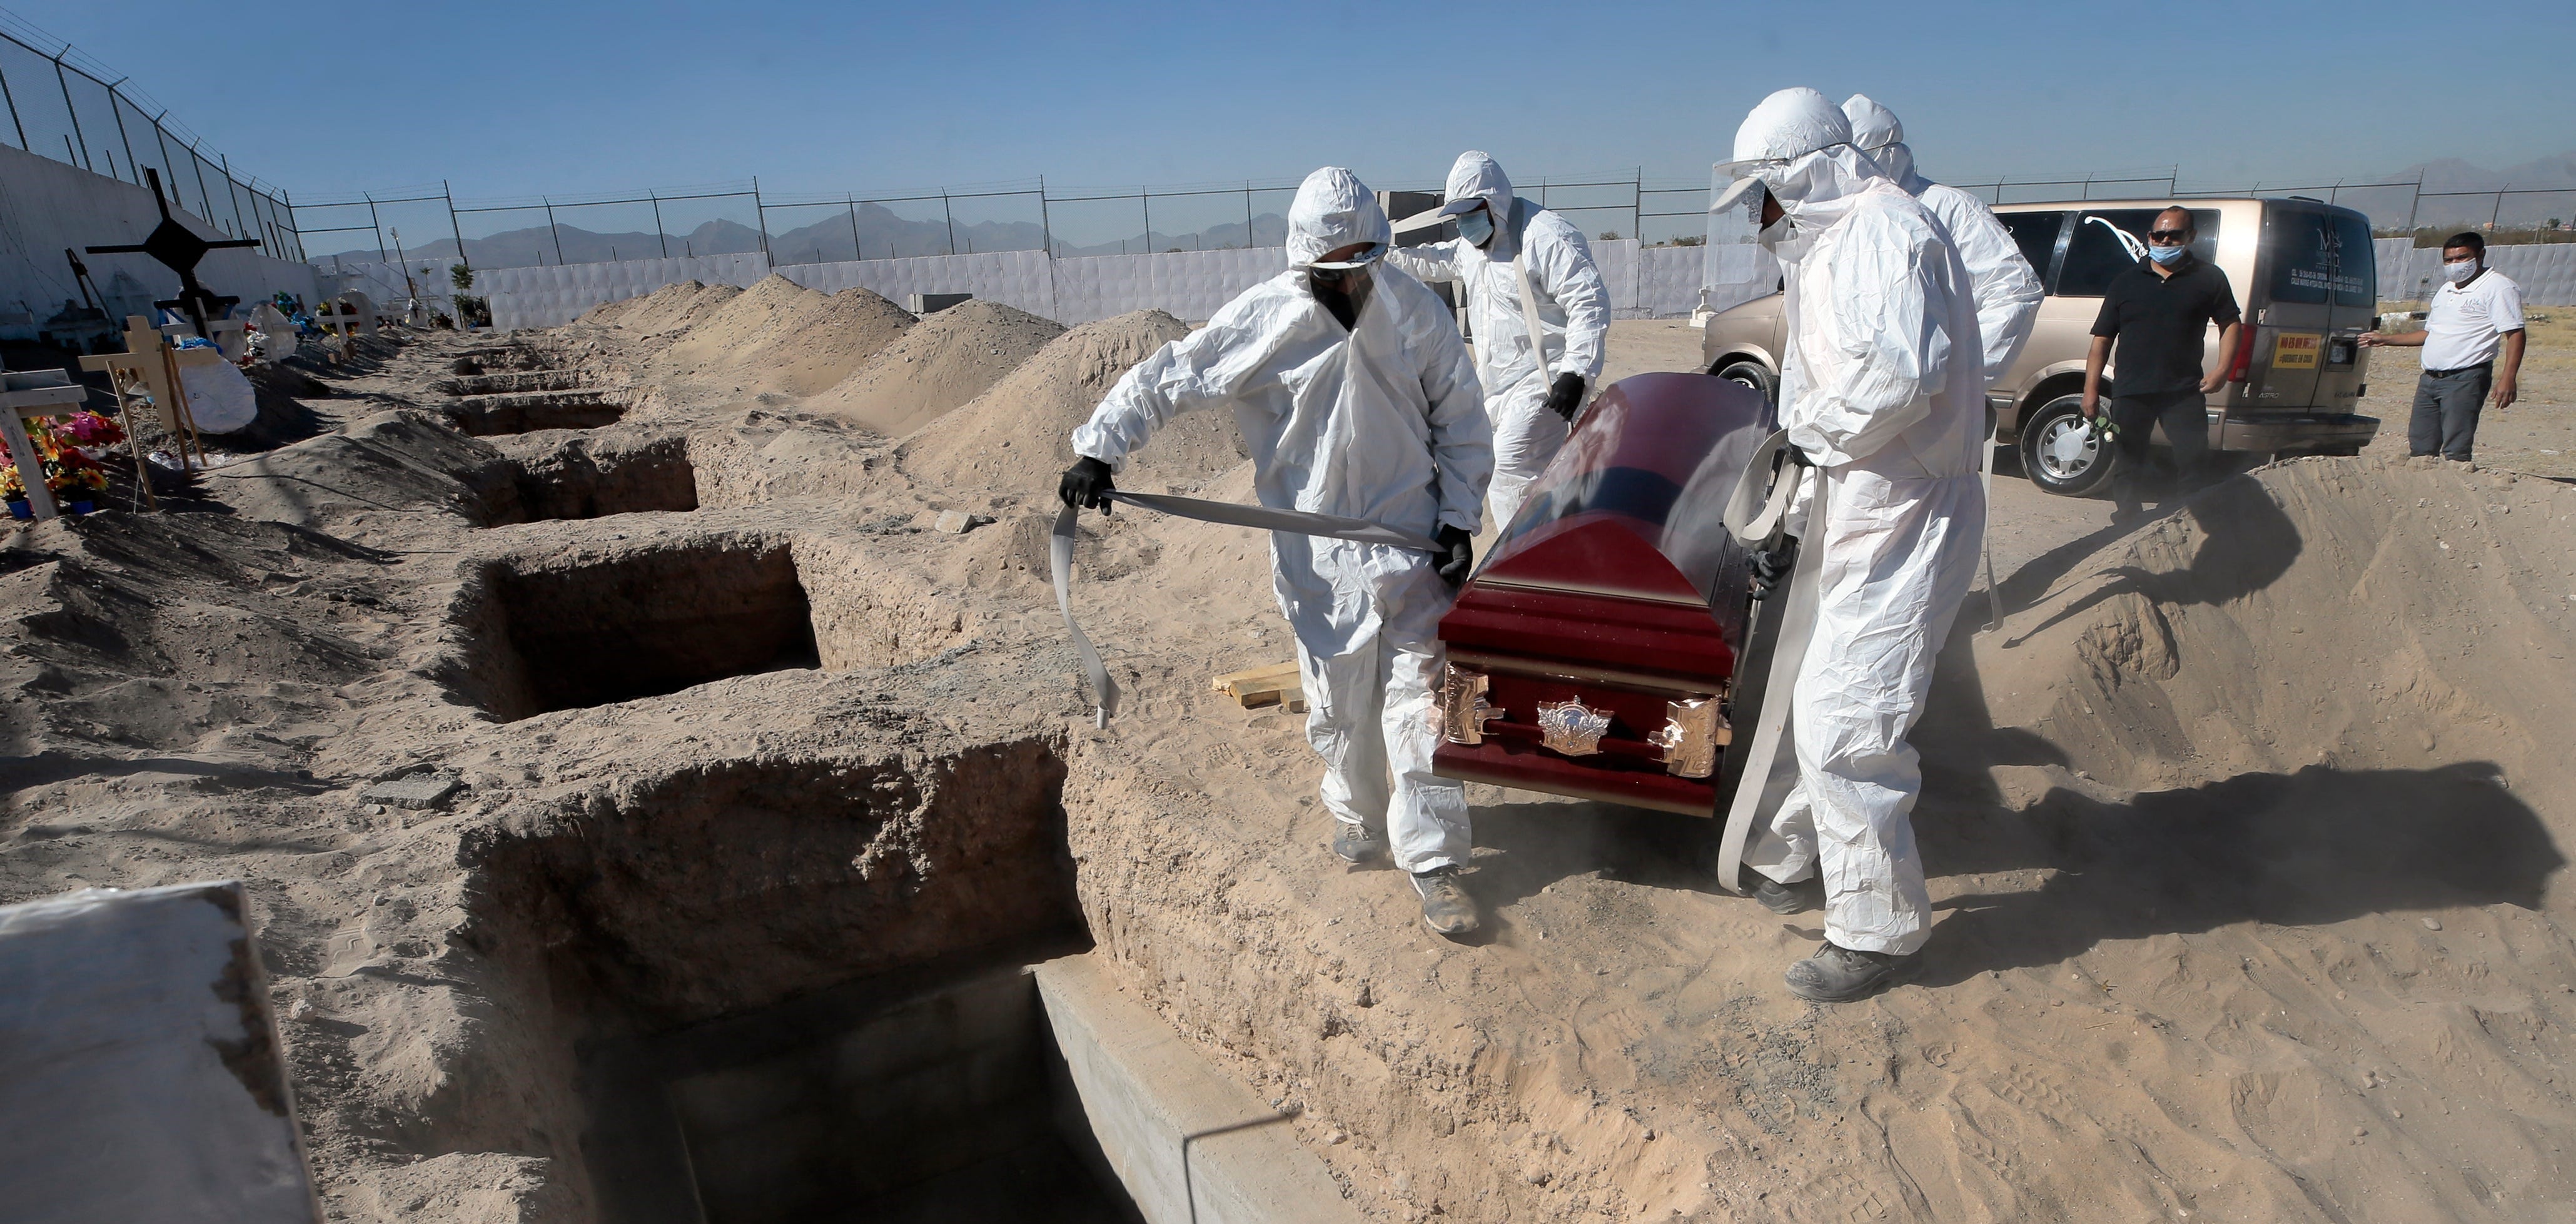 Cemetery workers carry a casket to a specially prepared COVID-19 grave as coronavirus deaths continue to rise in Juarez, Mexico.